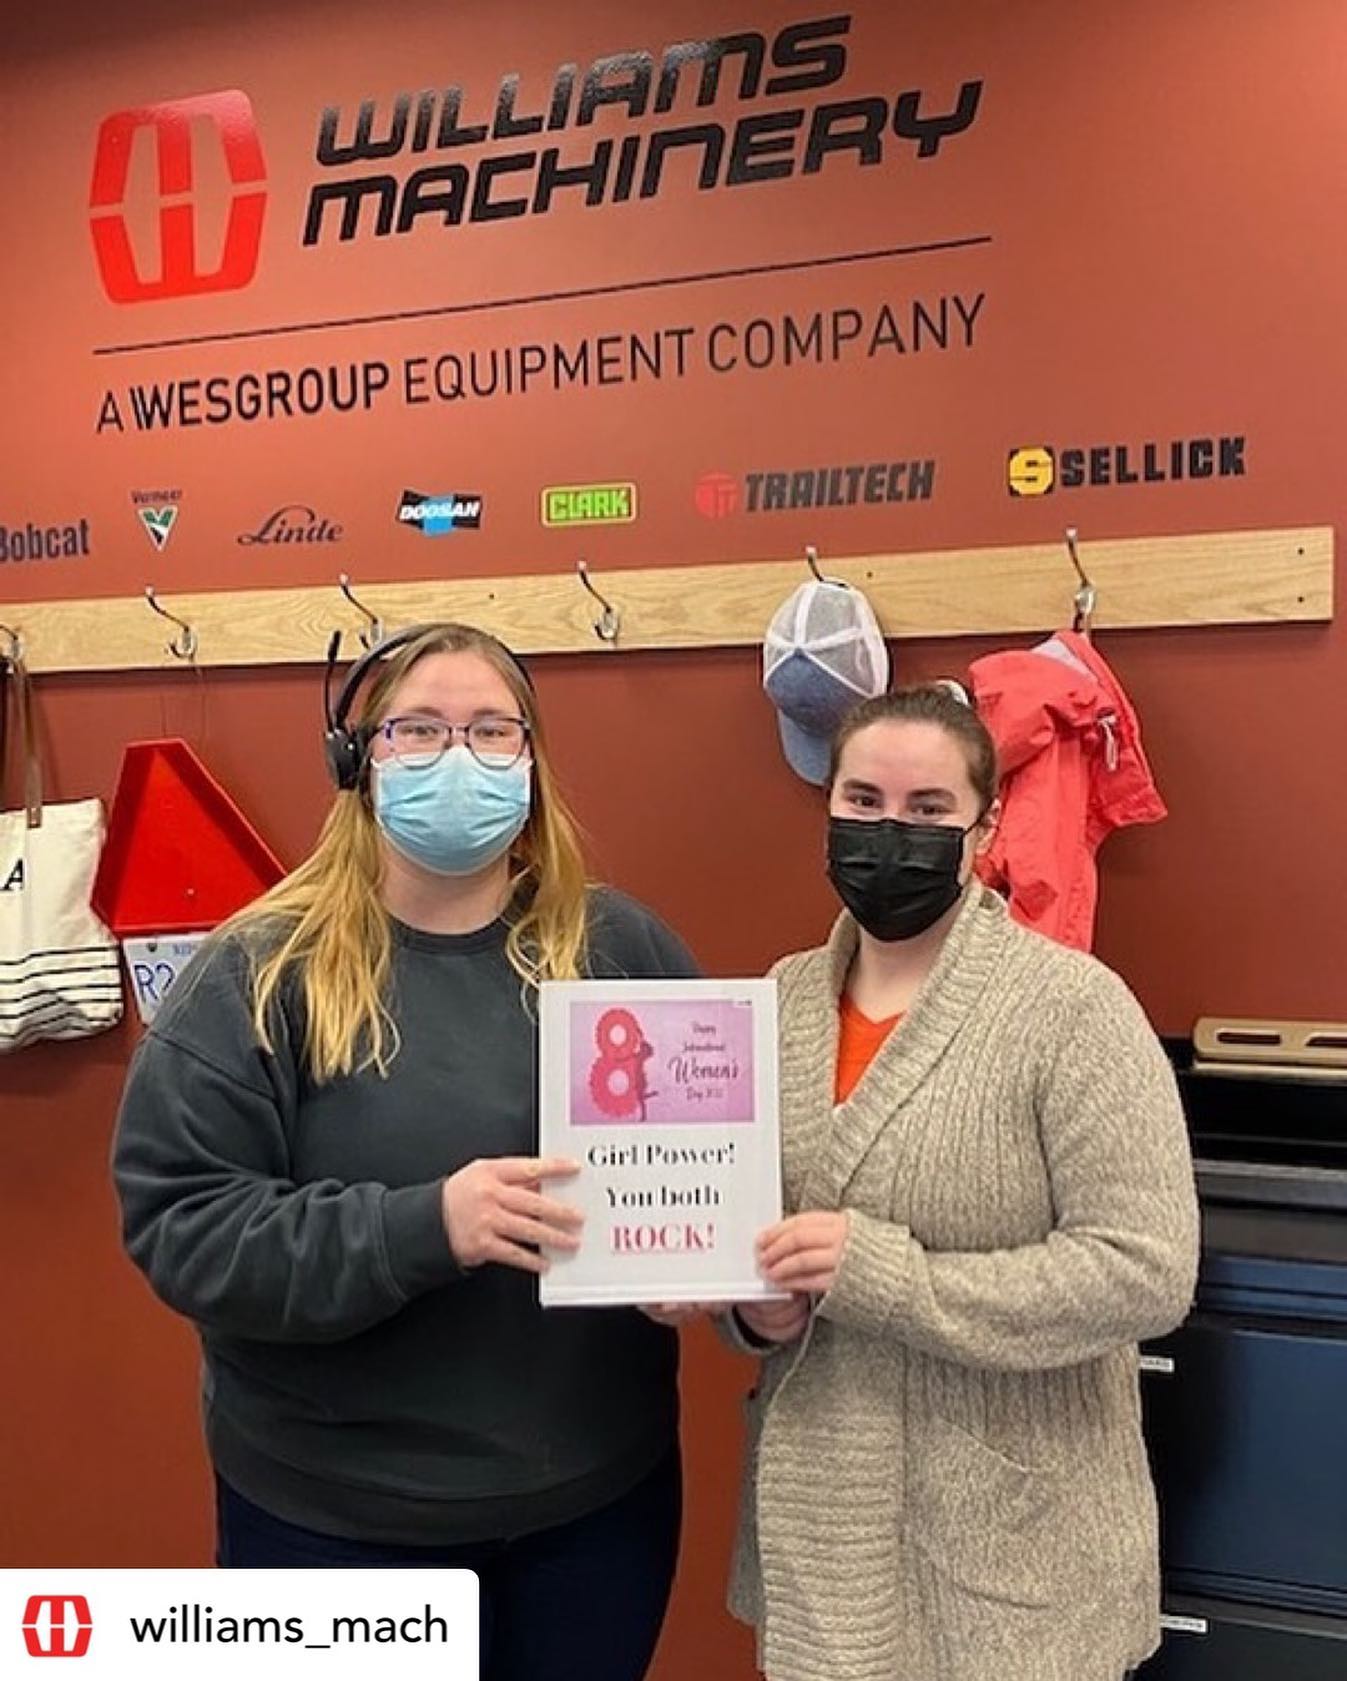 #repost @williams_mach 

Celebrating International Women’s Day in Prince George!
Thank you Ashley and Erin for all the incredible work you do for Williams Machinery and the PG team 💪🏻

#internationalwomensday #williamsmachinery